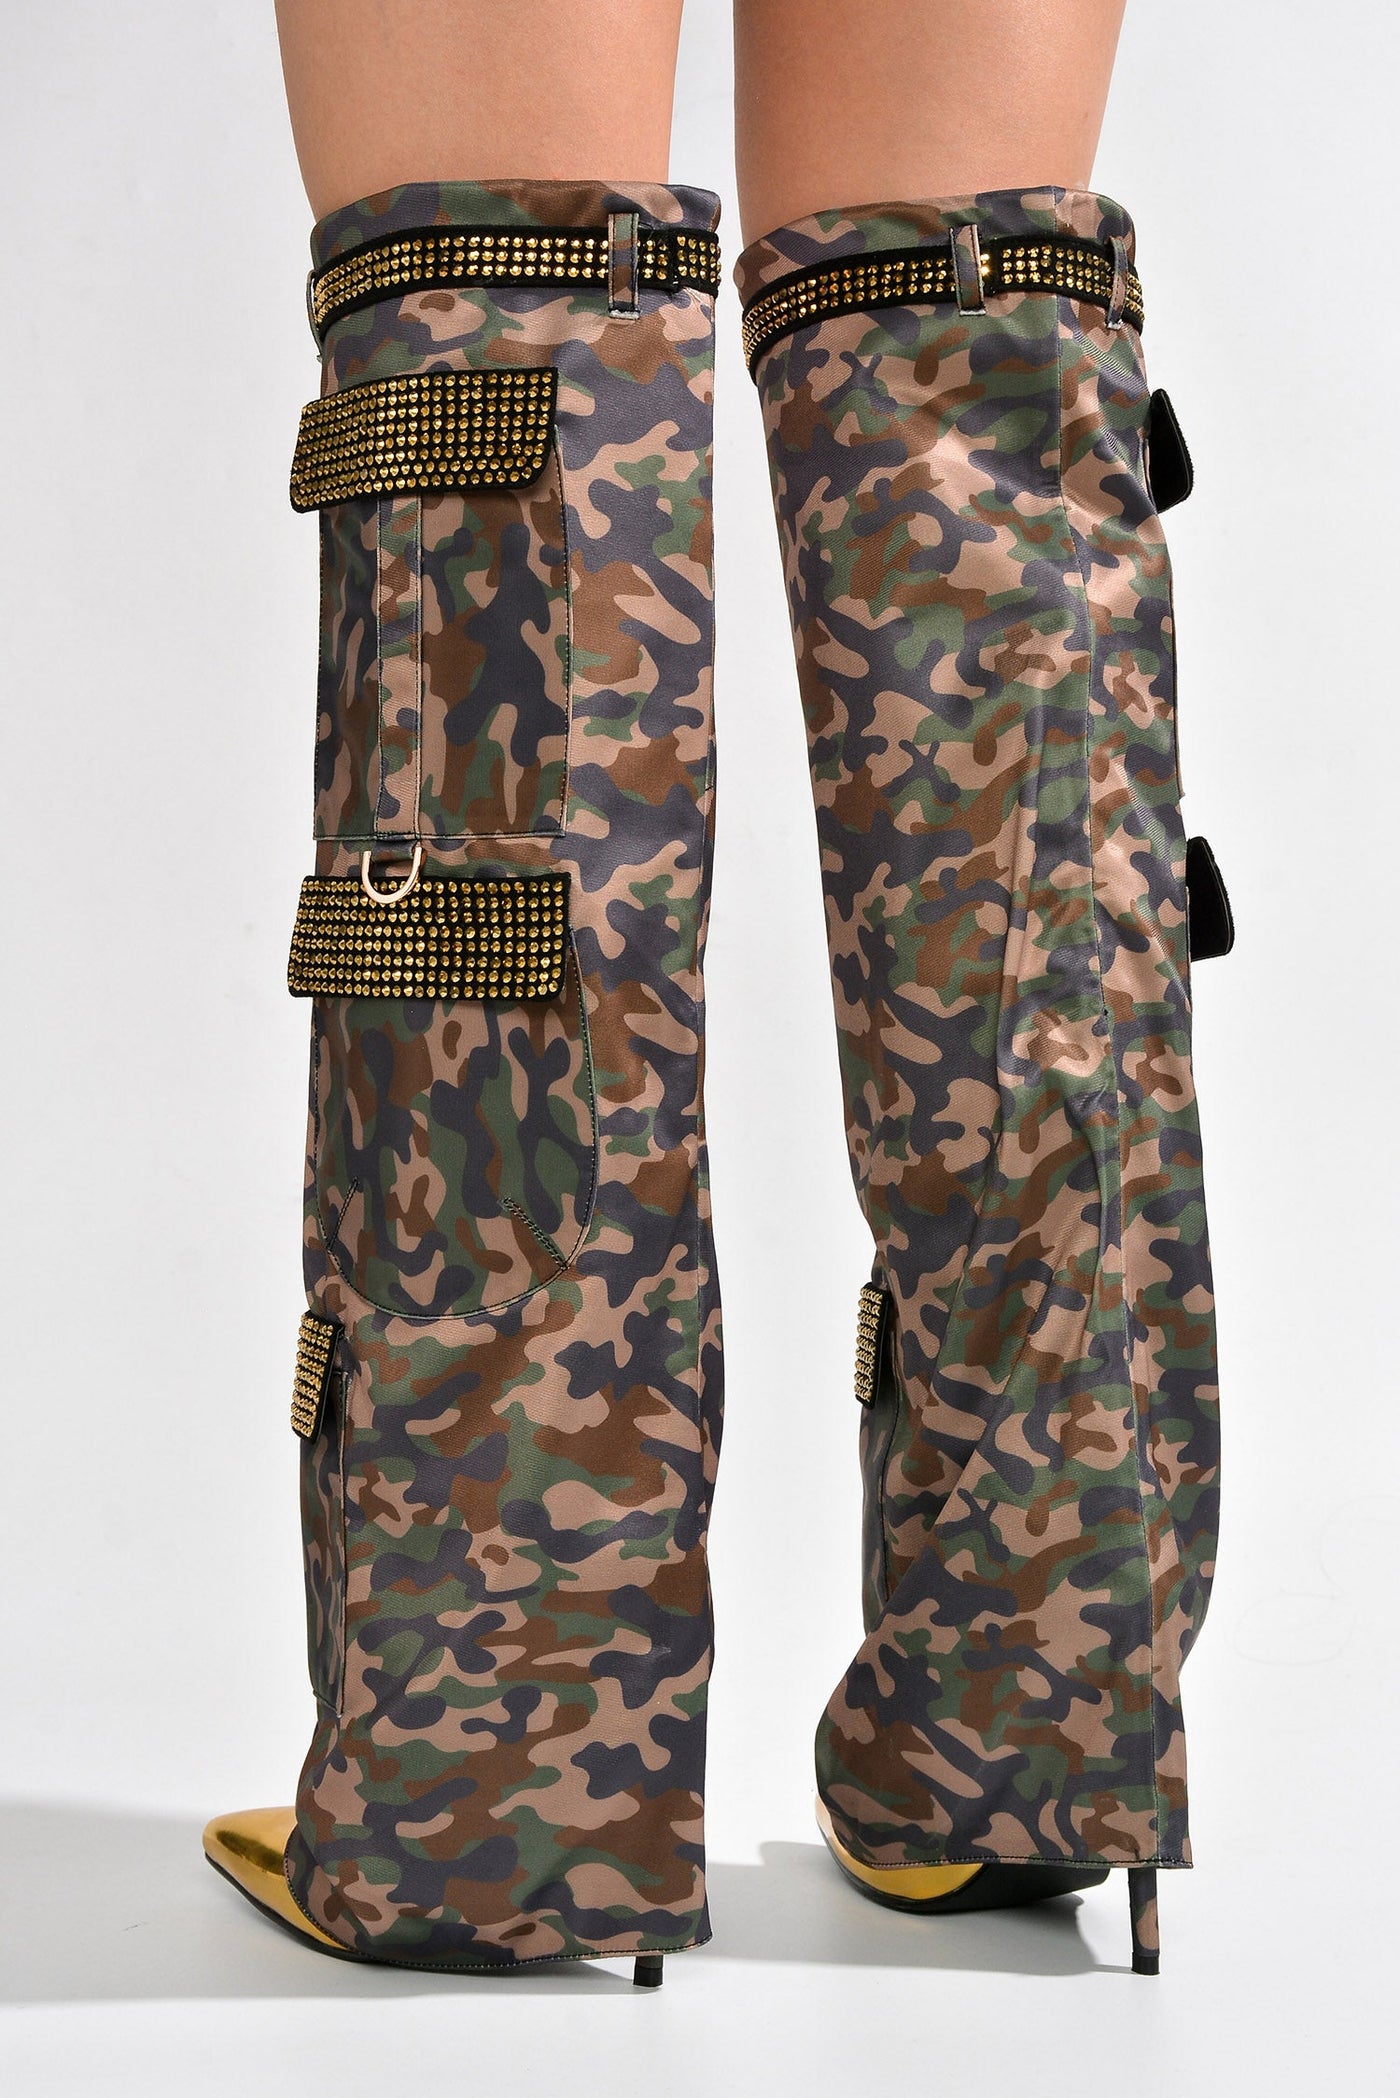 BUNNO - CAMOUFLAGE Thigh High Boots - AMIClubwear